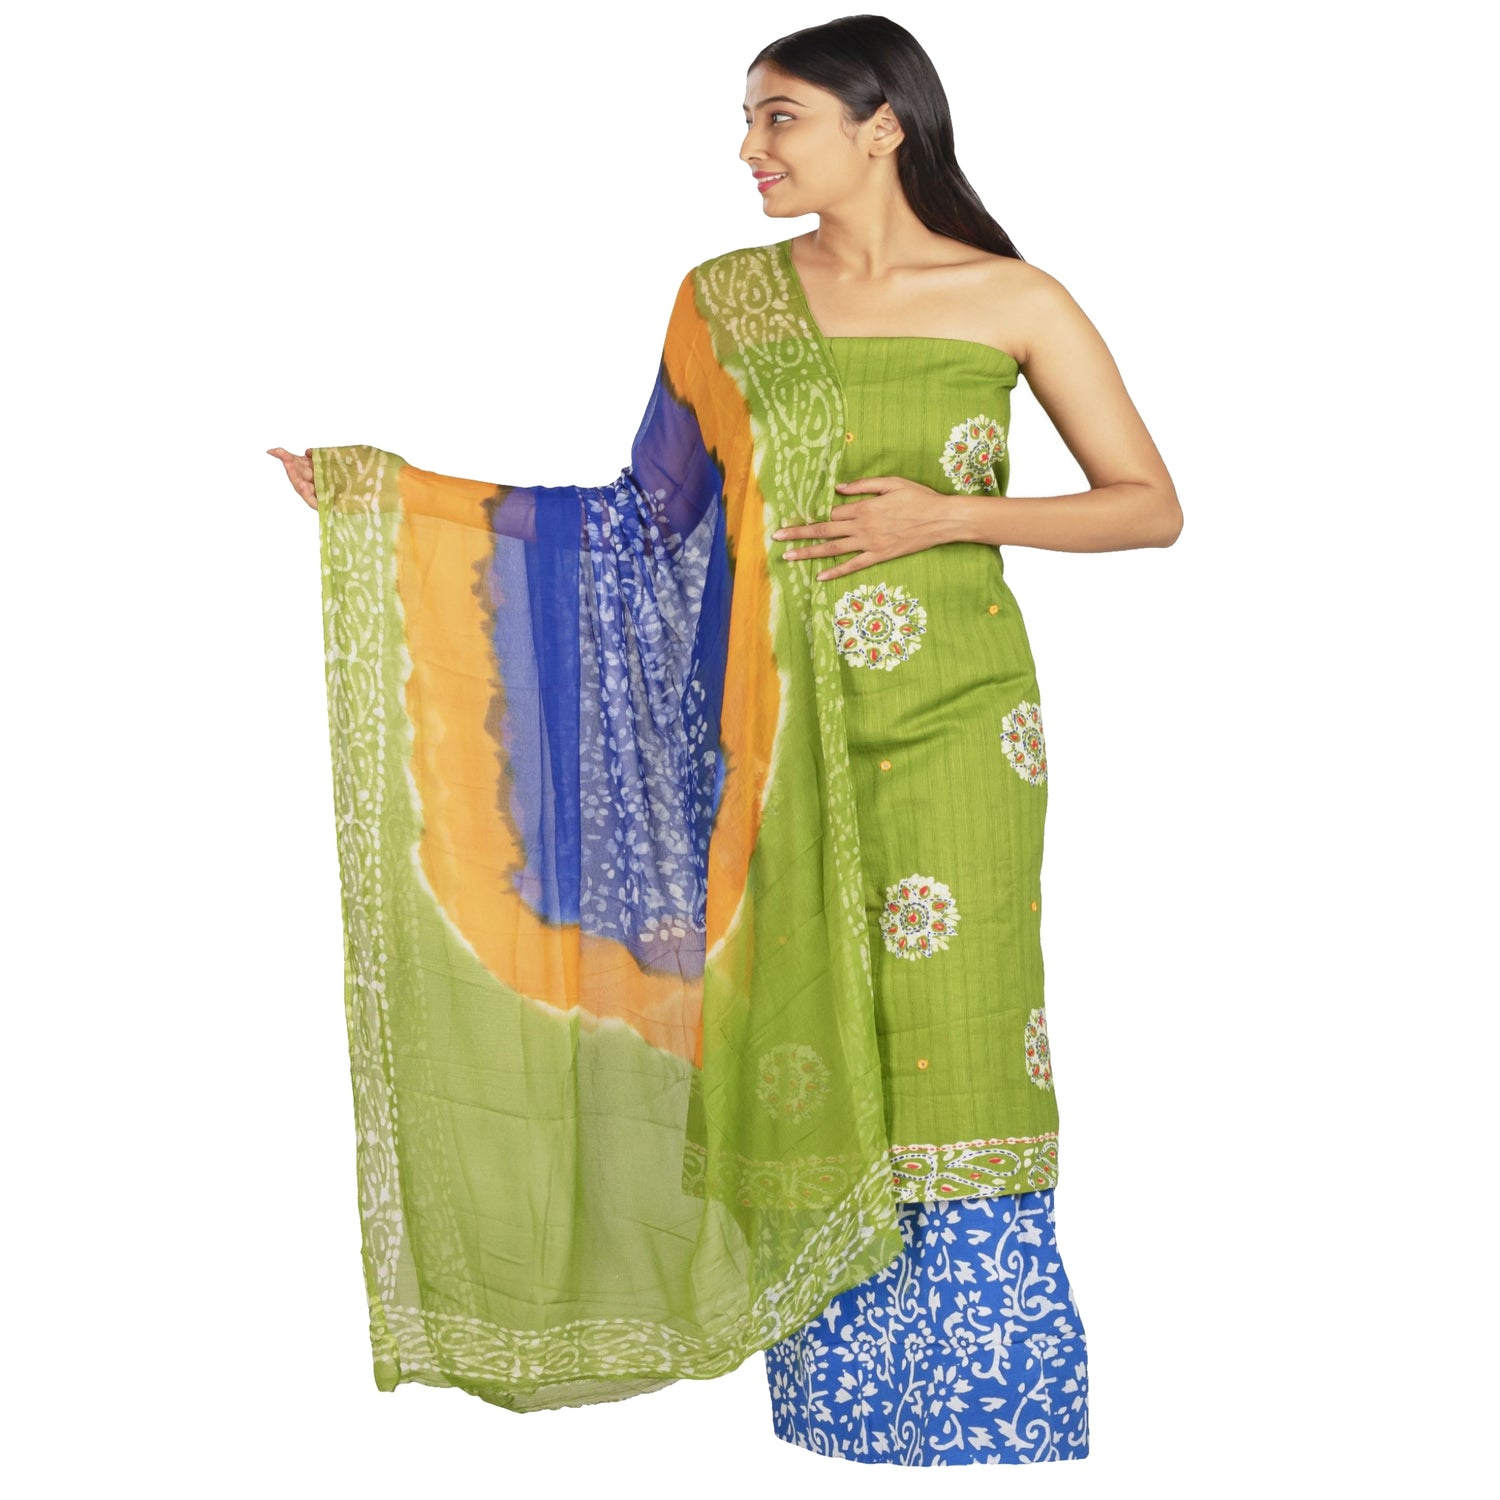 green cotton top with embroidery and print in white, blue cotton bottom, chiffon dupatta in green,orange and blue with print